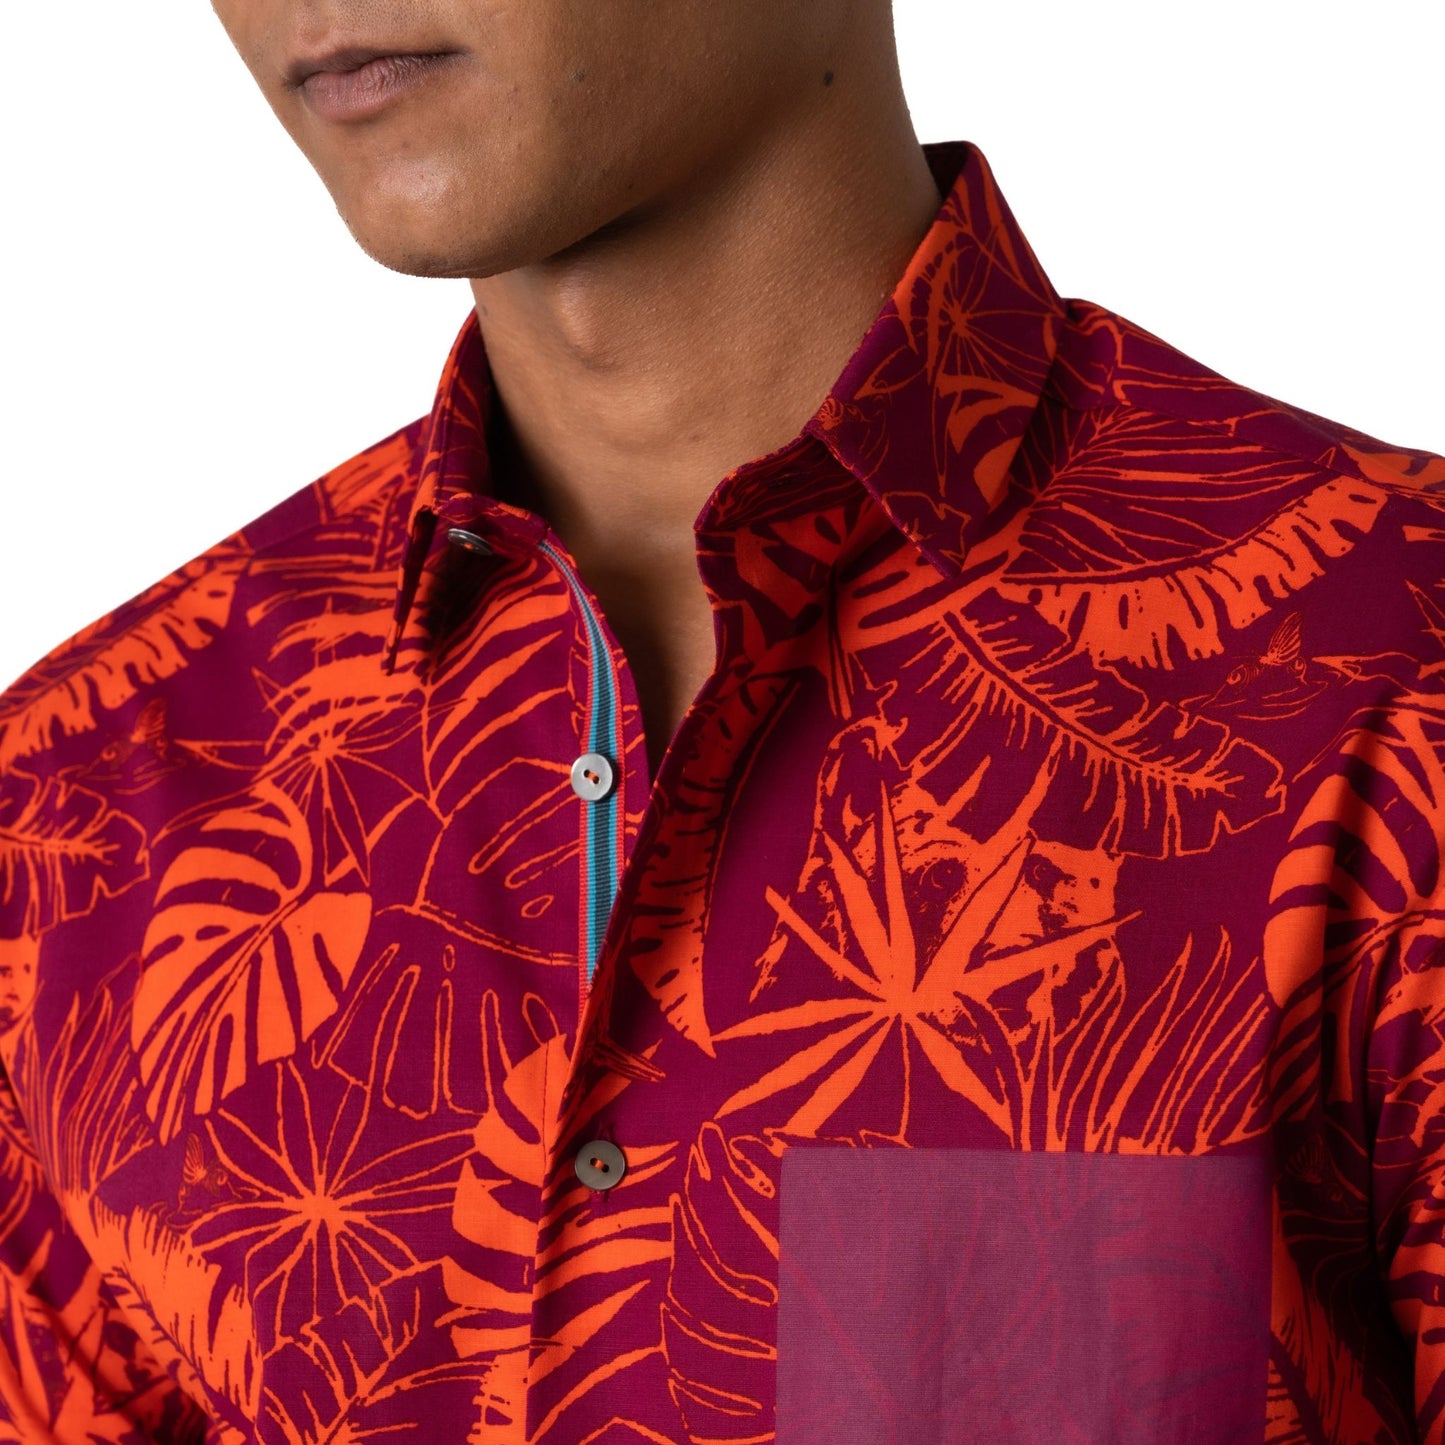 Tropical printed short sleeve shirt with regimental tape on under placket and pocket in print at chest